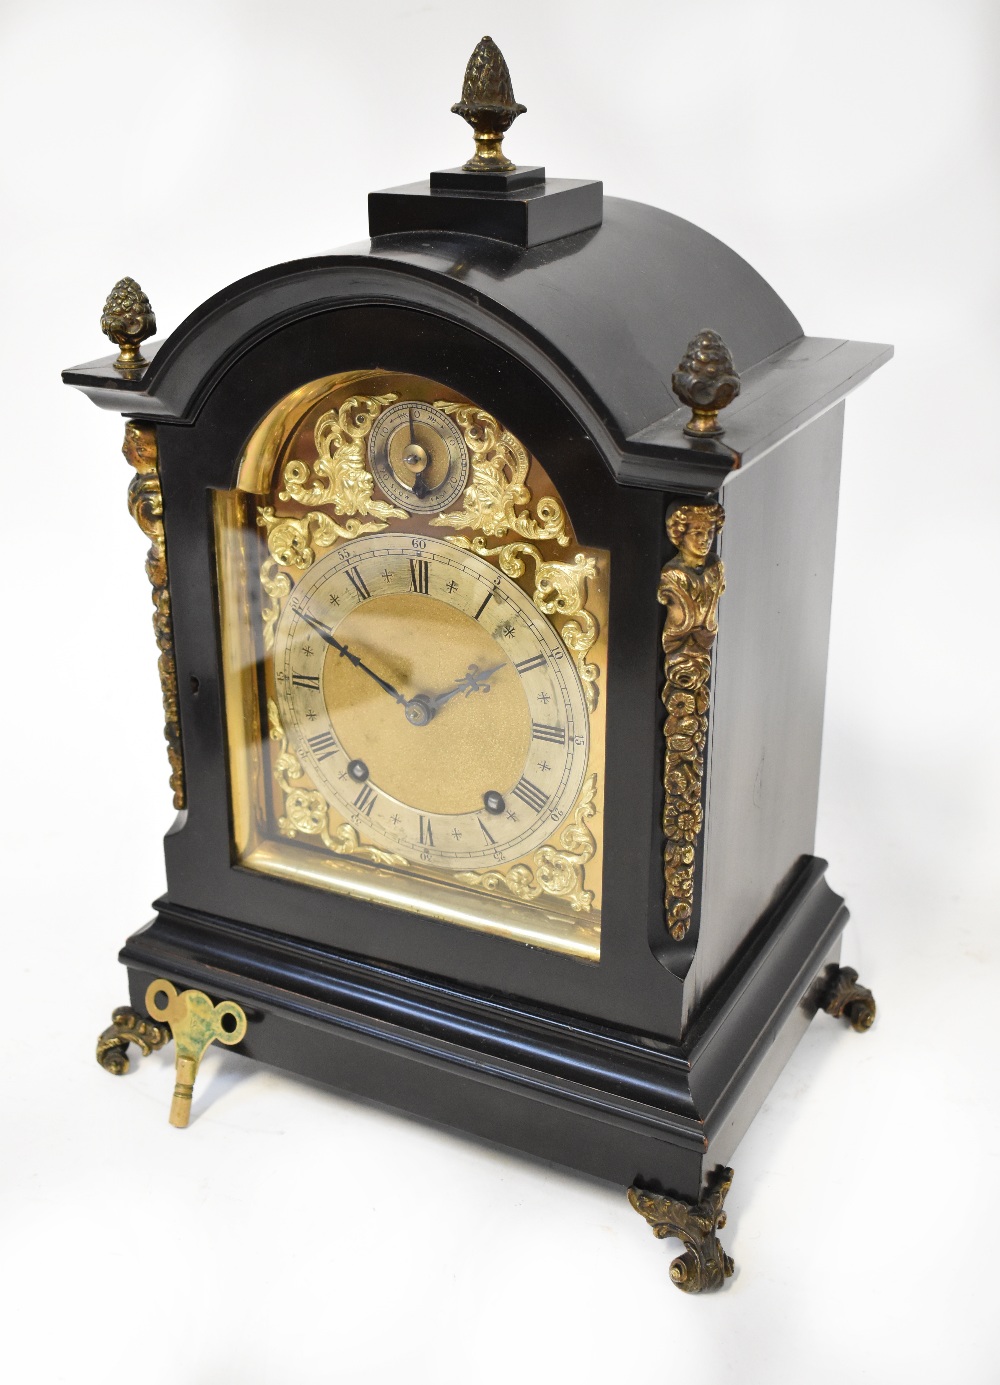 An early 20th century eight day bracket clock in ebonised and ormolu case with pineapple finials to